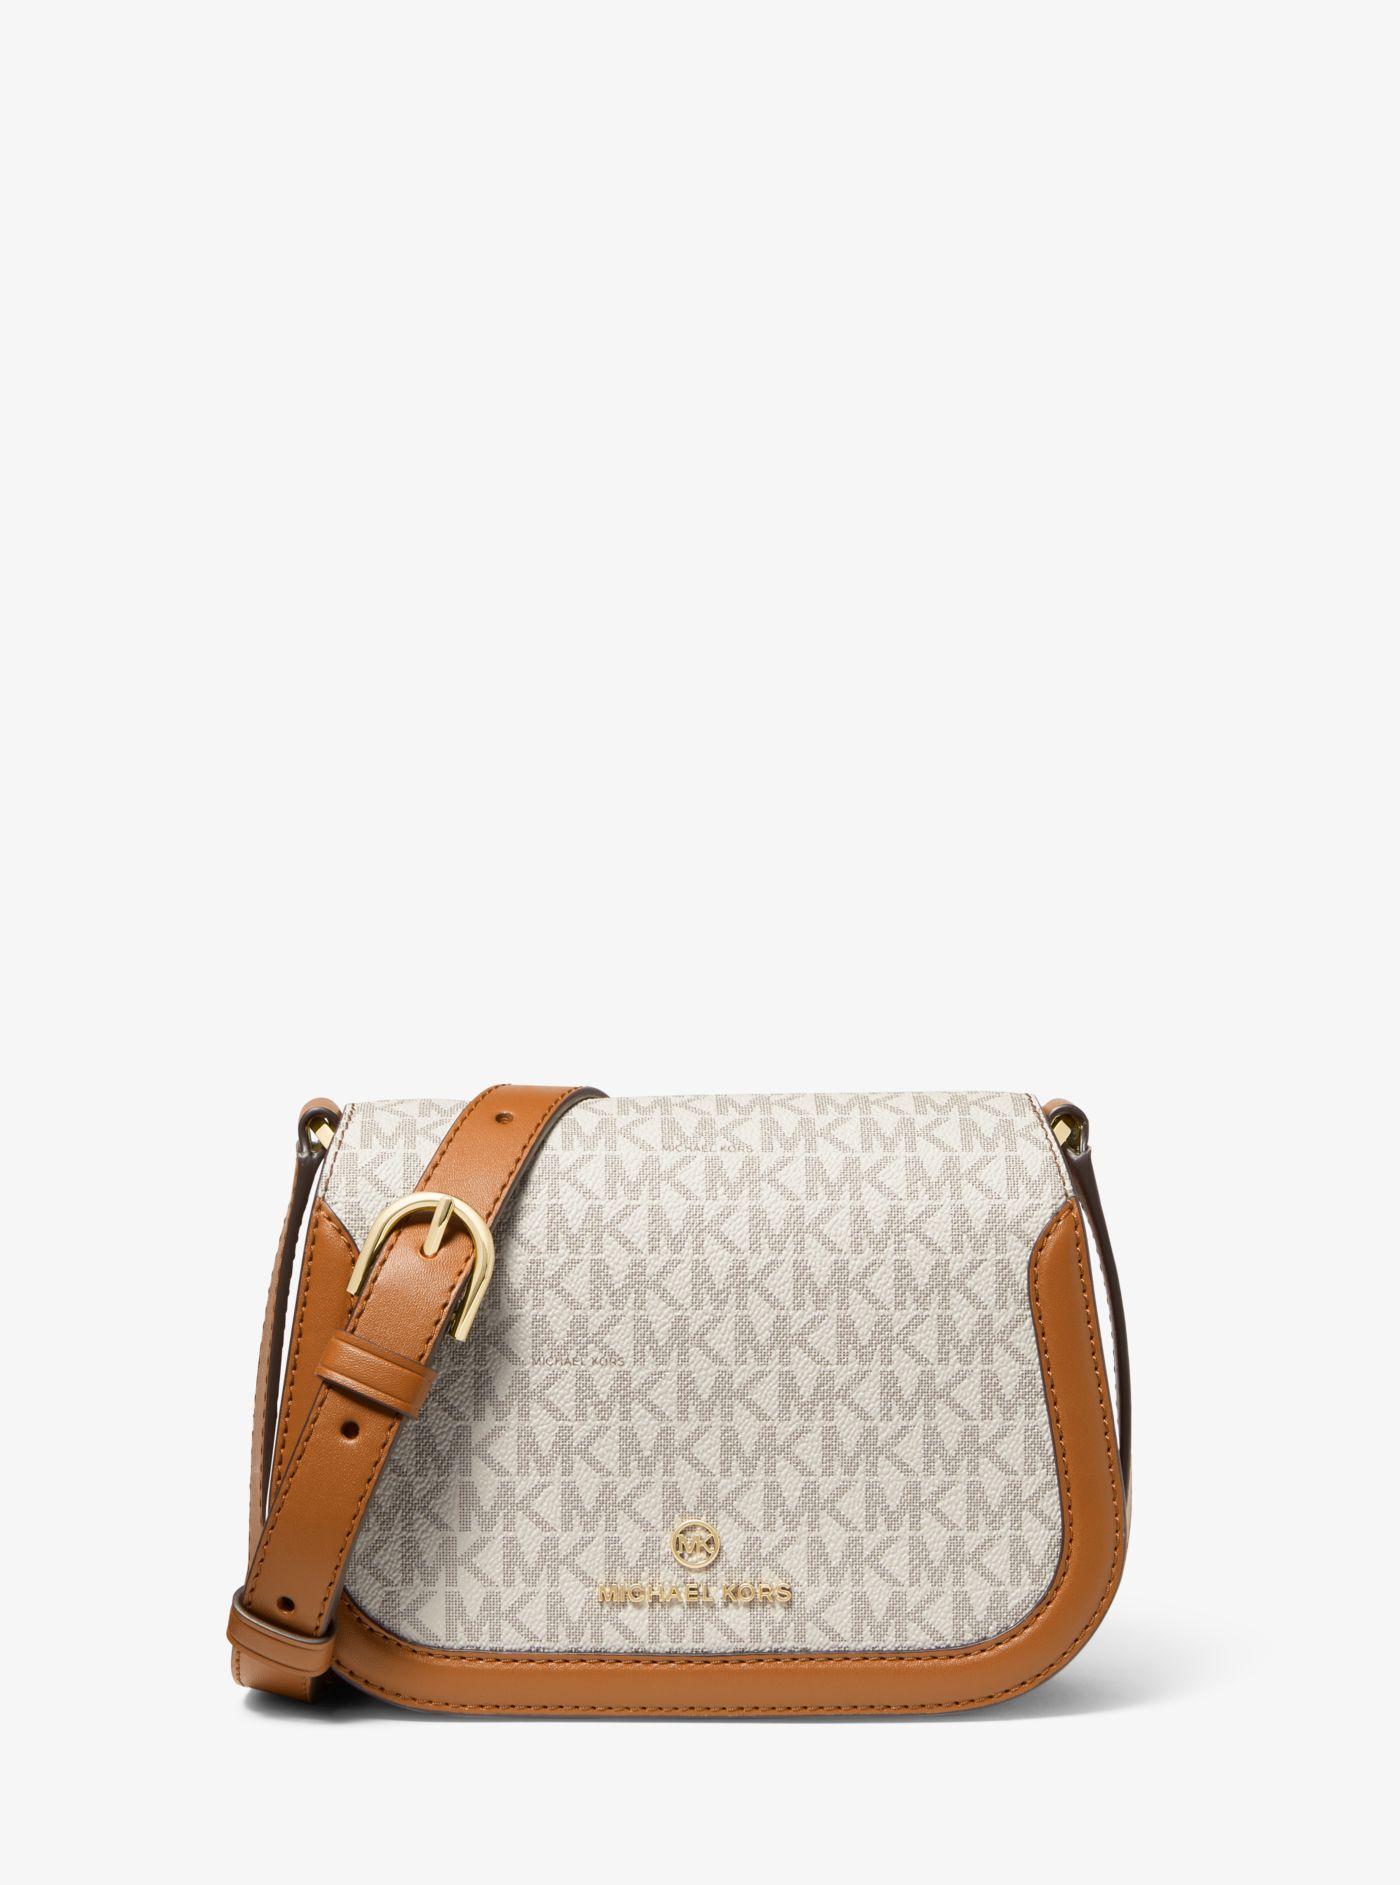 Michael Kors Lucie Small Logo Crossbody Bag in Natural | Lyst